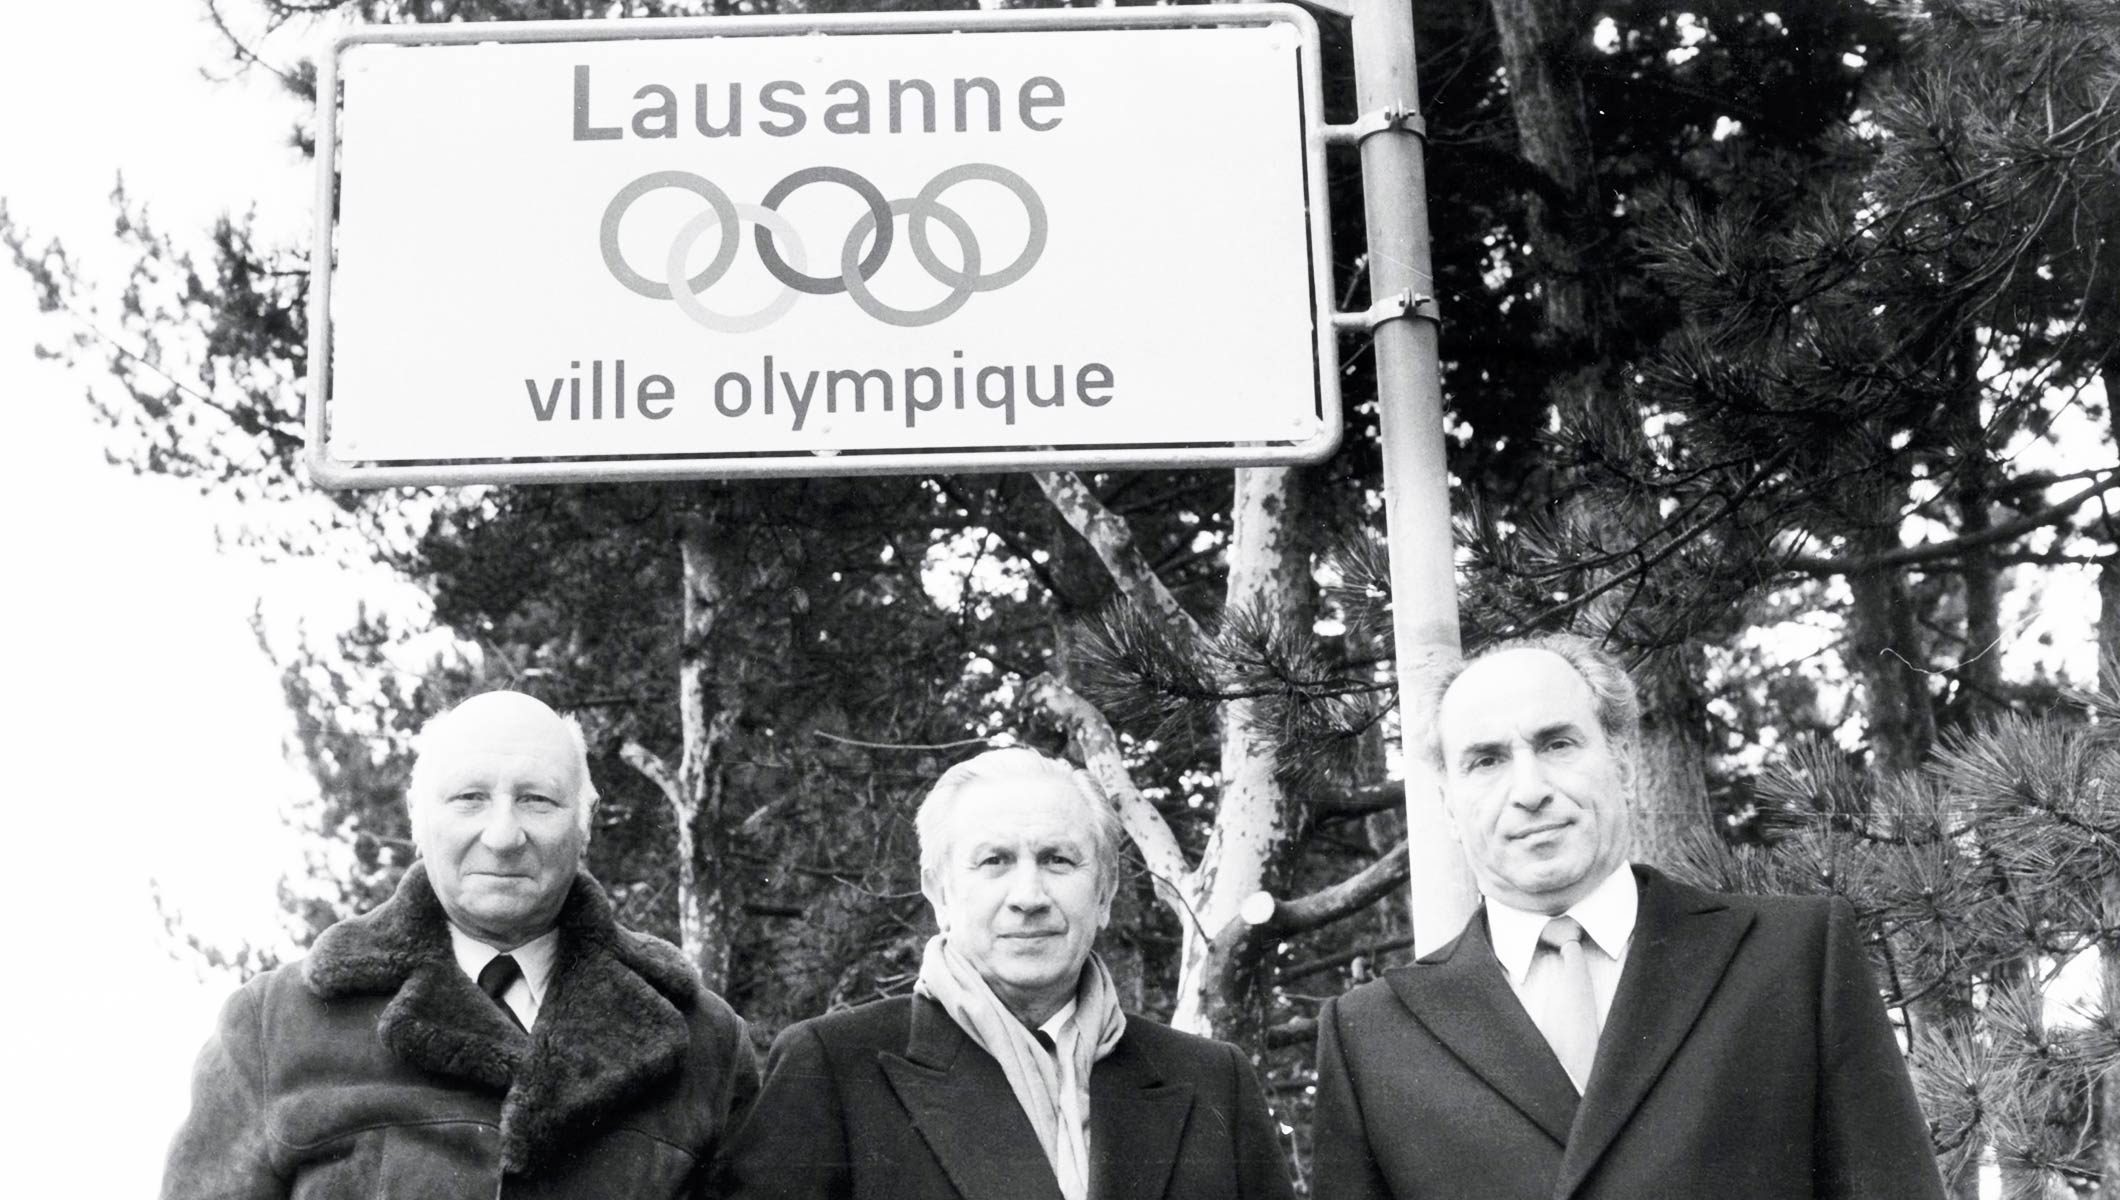 Lausanne Olympic Capital